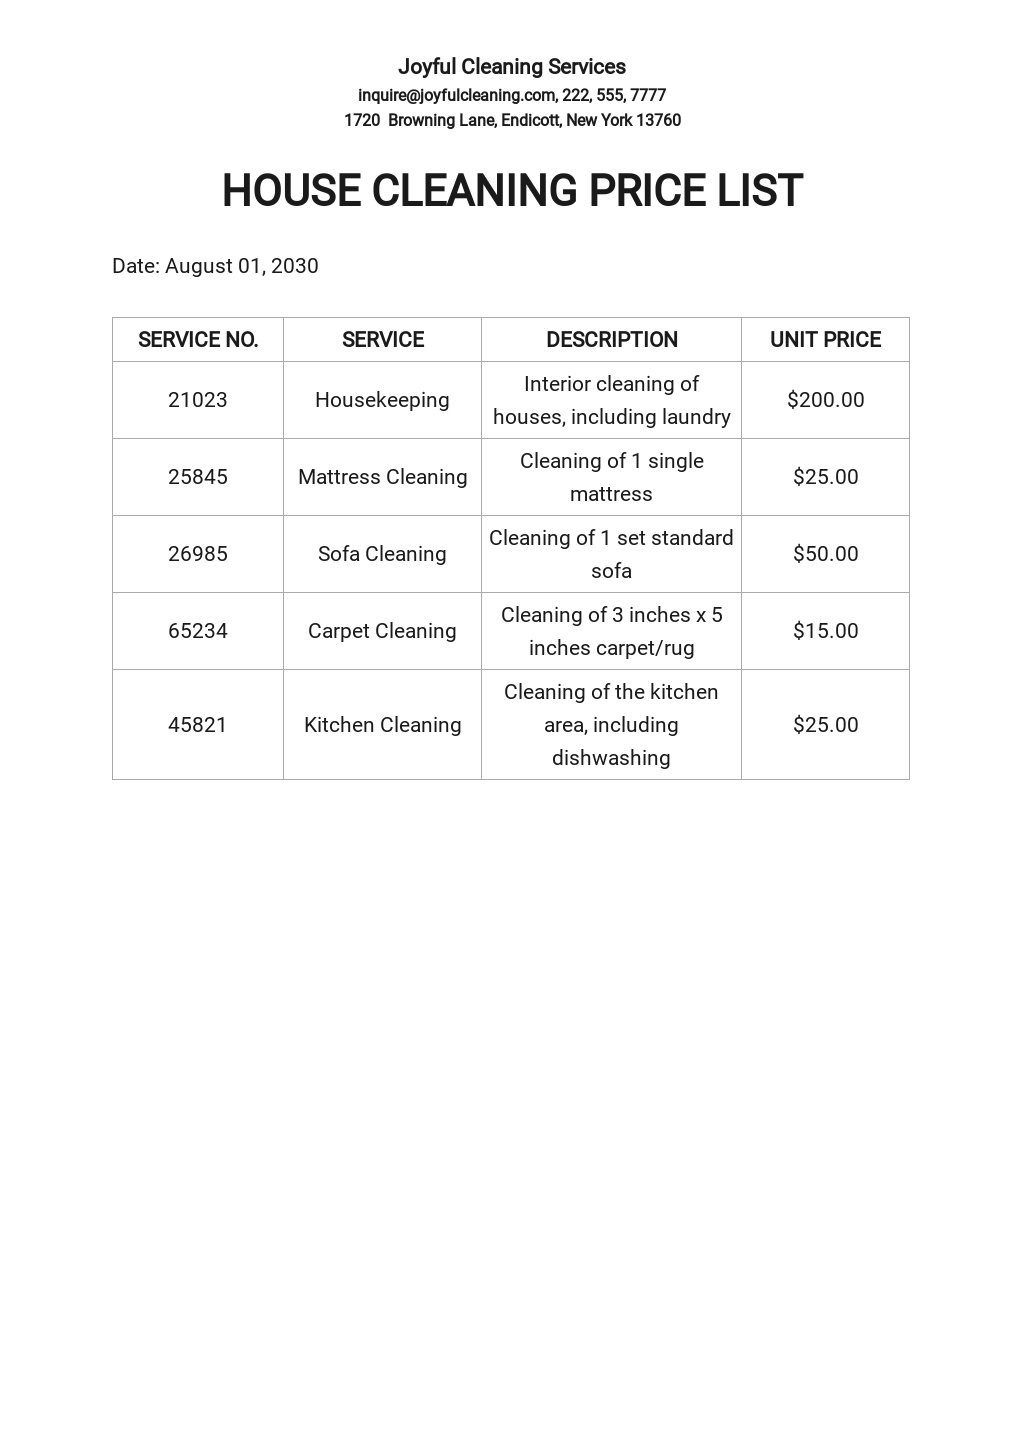 House Cleaning Price List Template.jpe